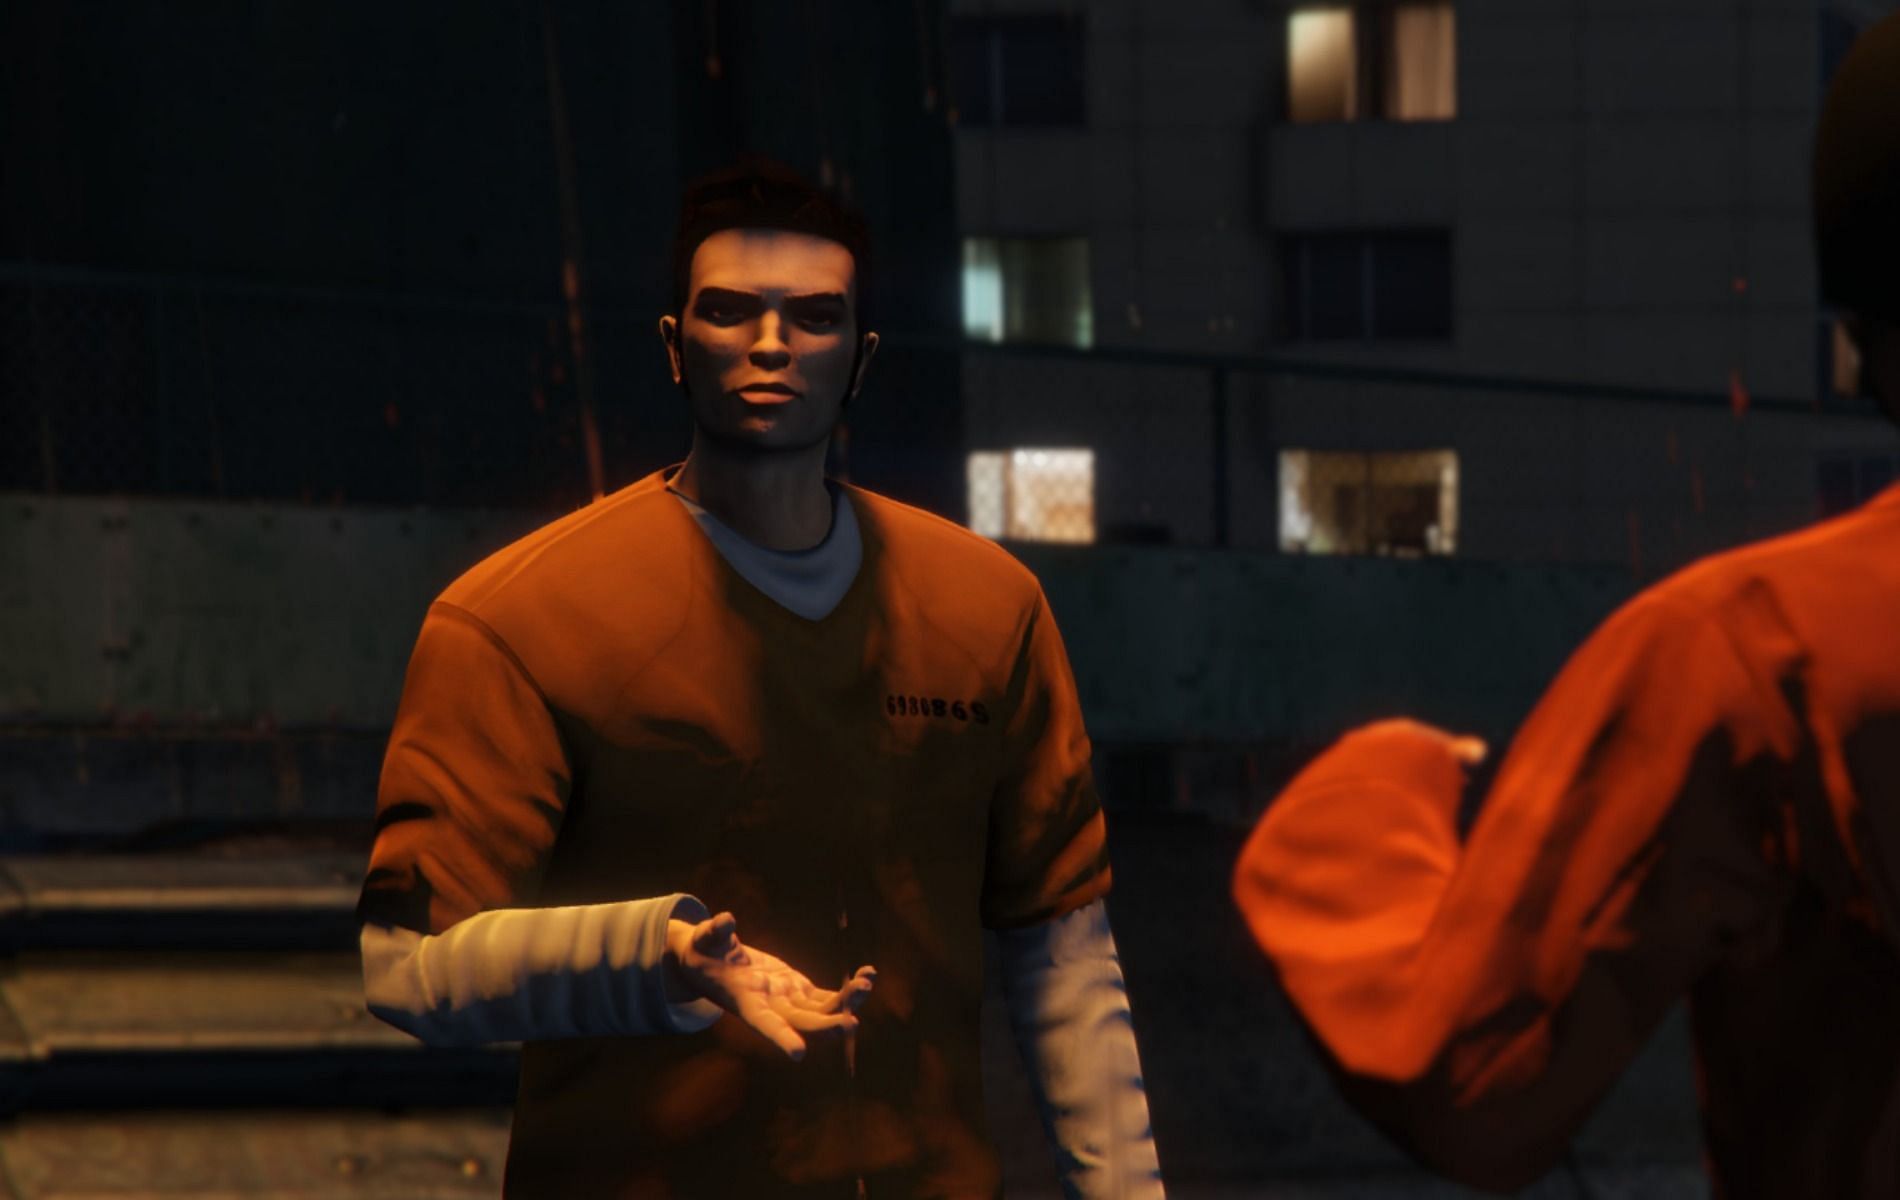 Claude&#039;s prison coveralls are the first outfit worn in the 3D Universe (Image via GTA5-Mods.com)